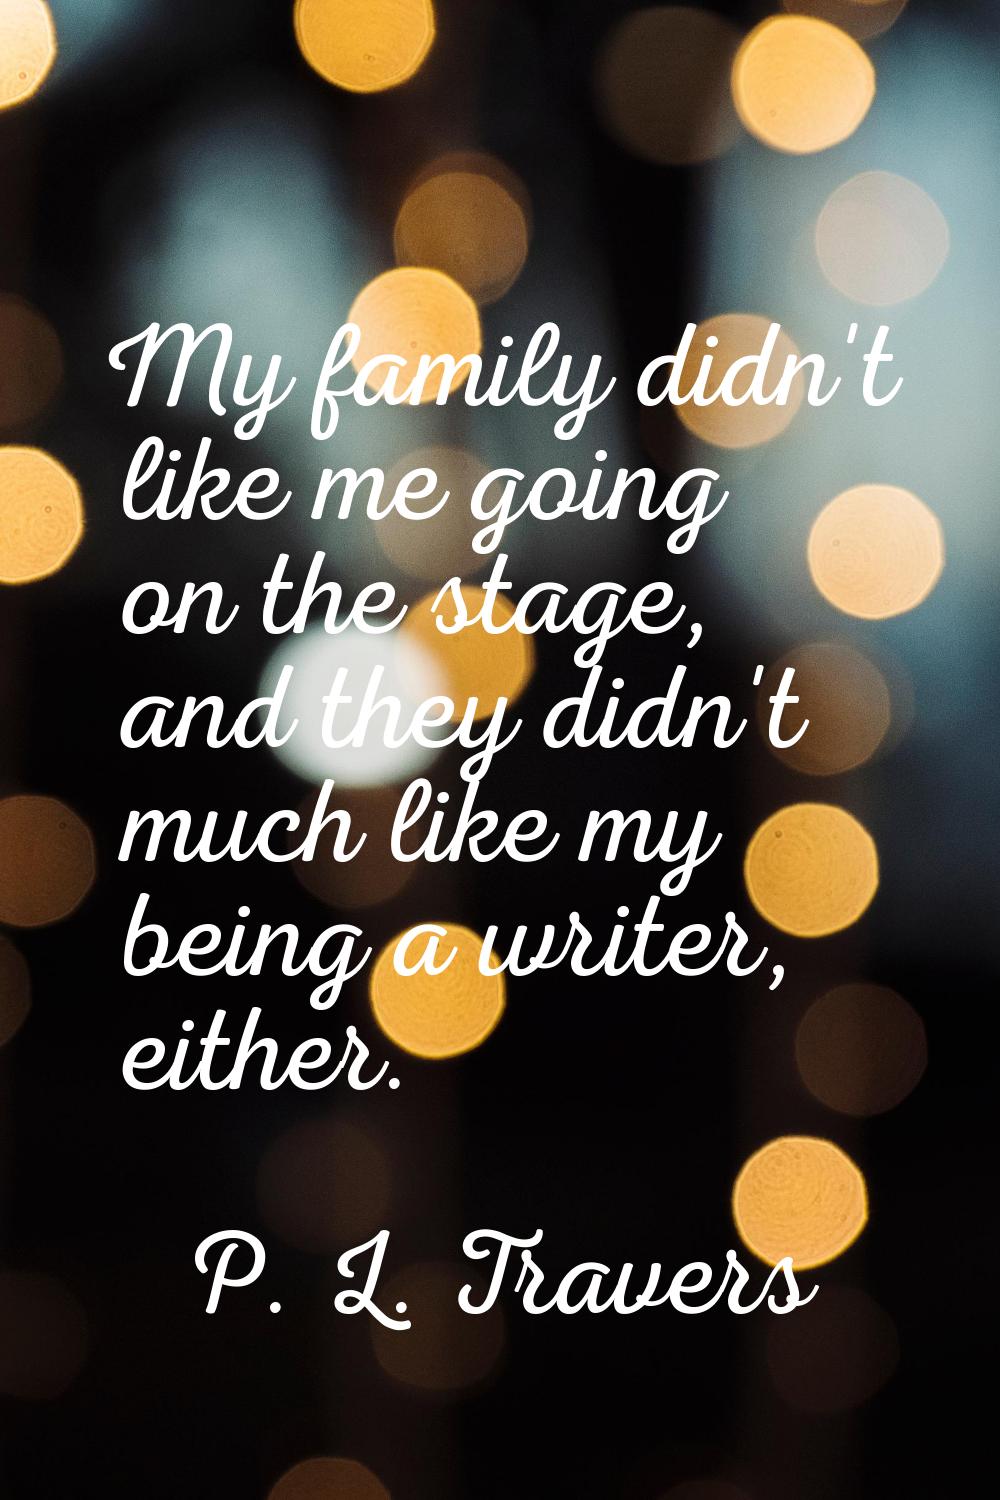 My family didn't like me going on the stage, and they didn't much like my being a writer, either.